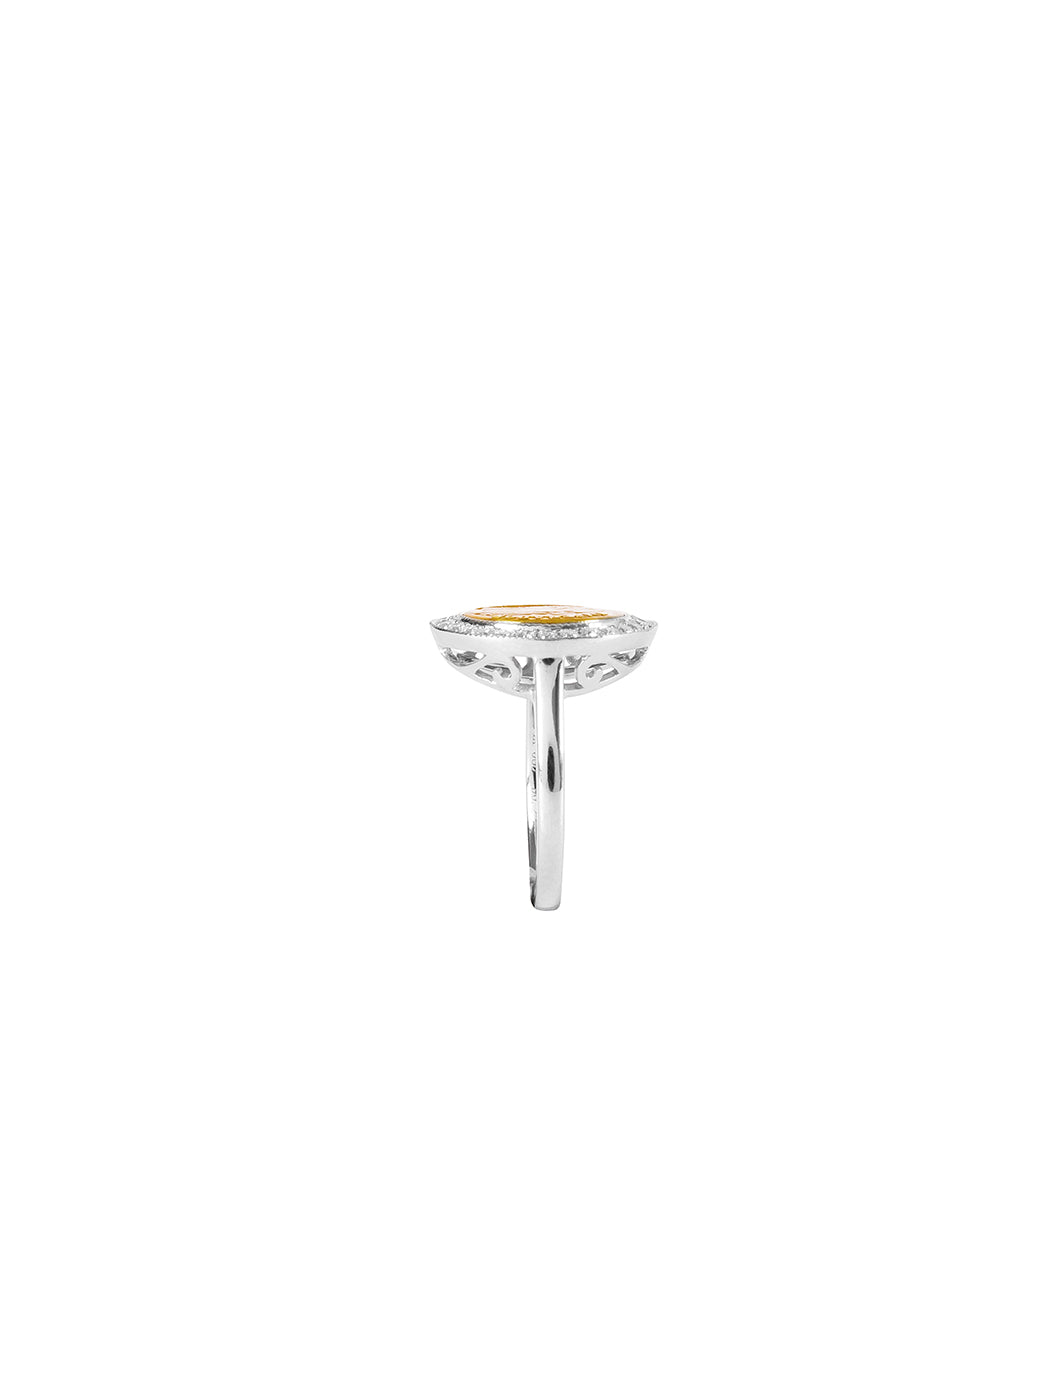 Fiorina Jewellery Gold Button Pinkie Ring Side View